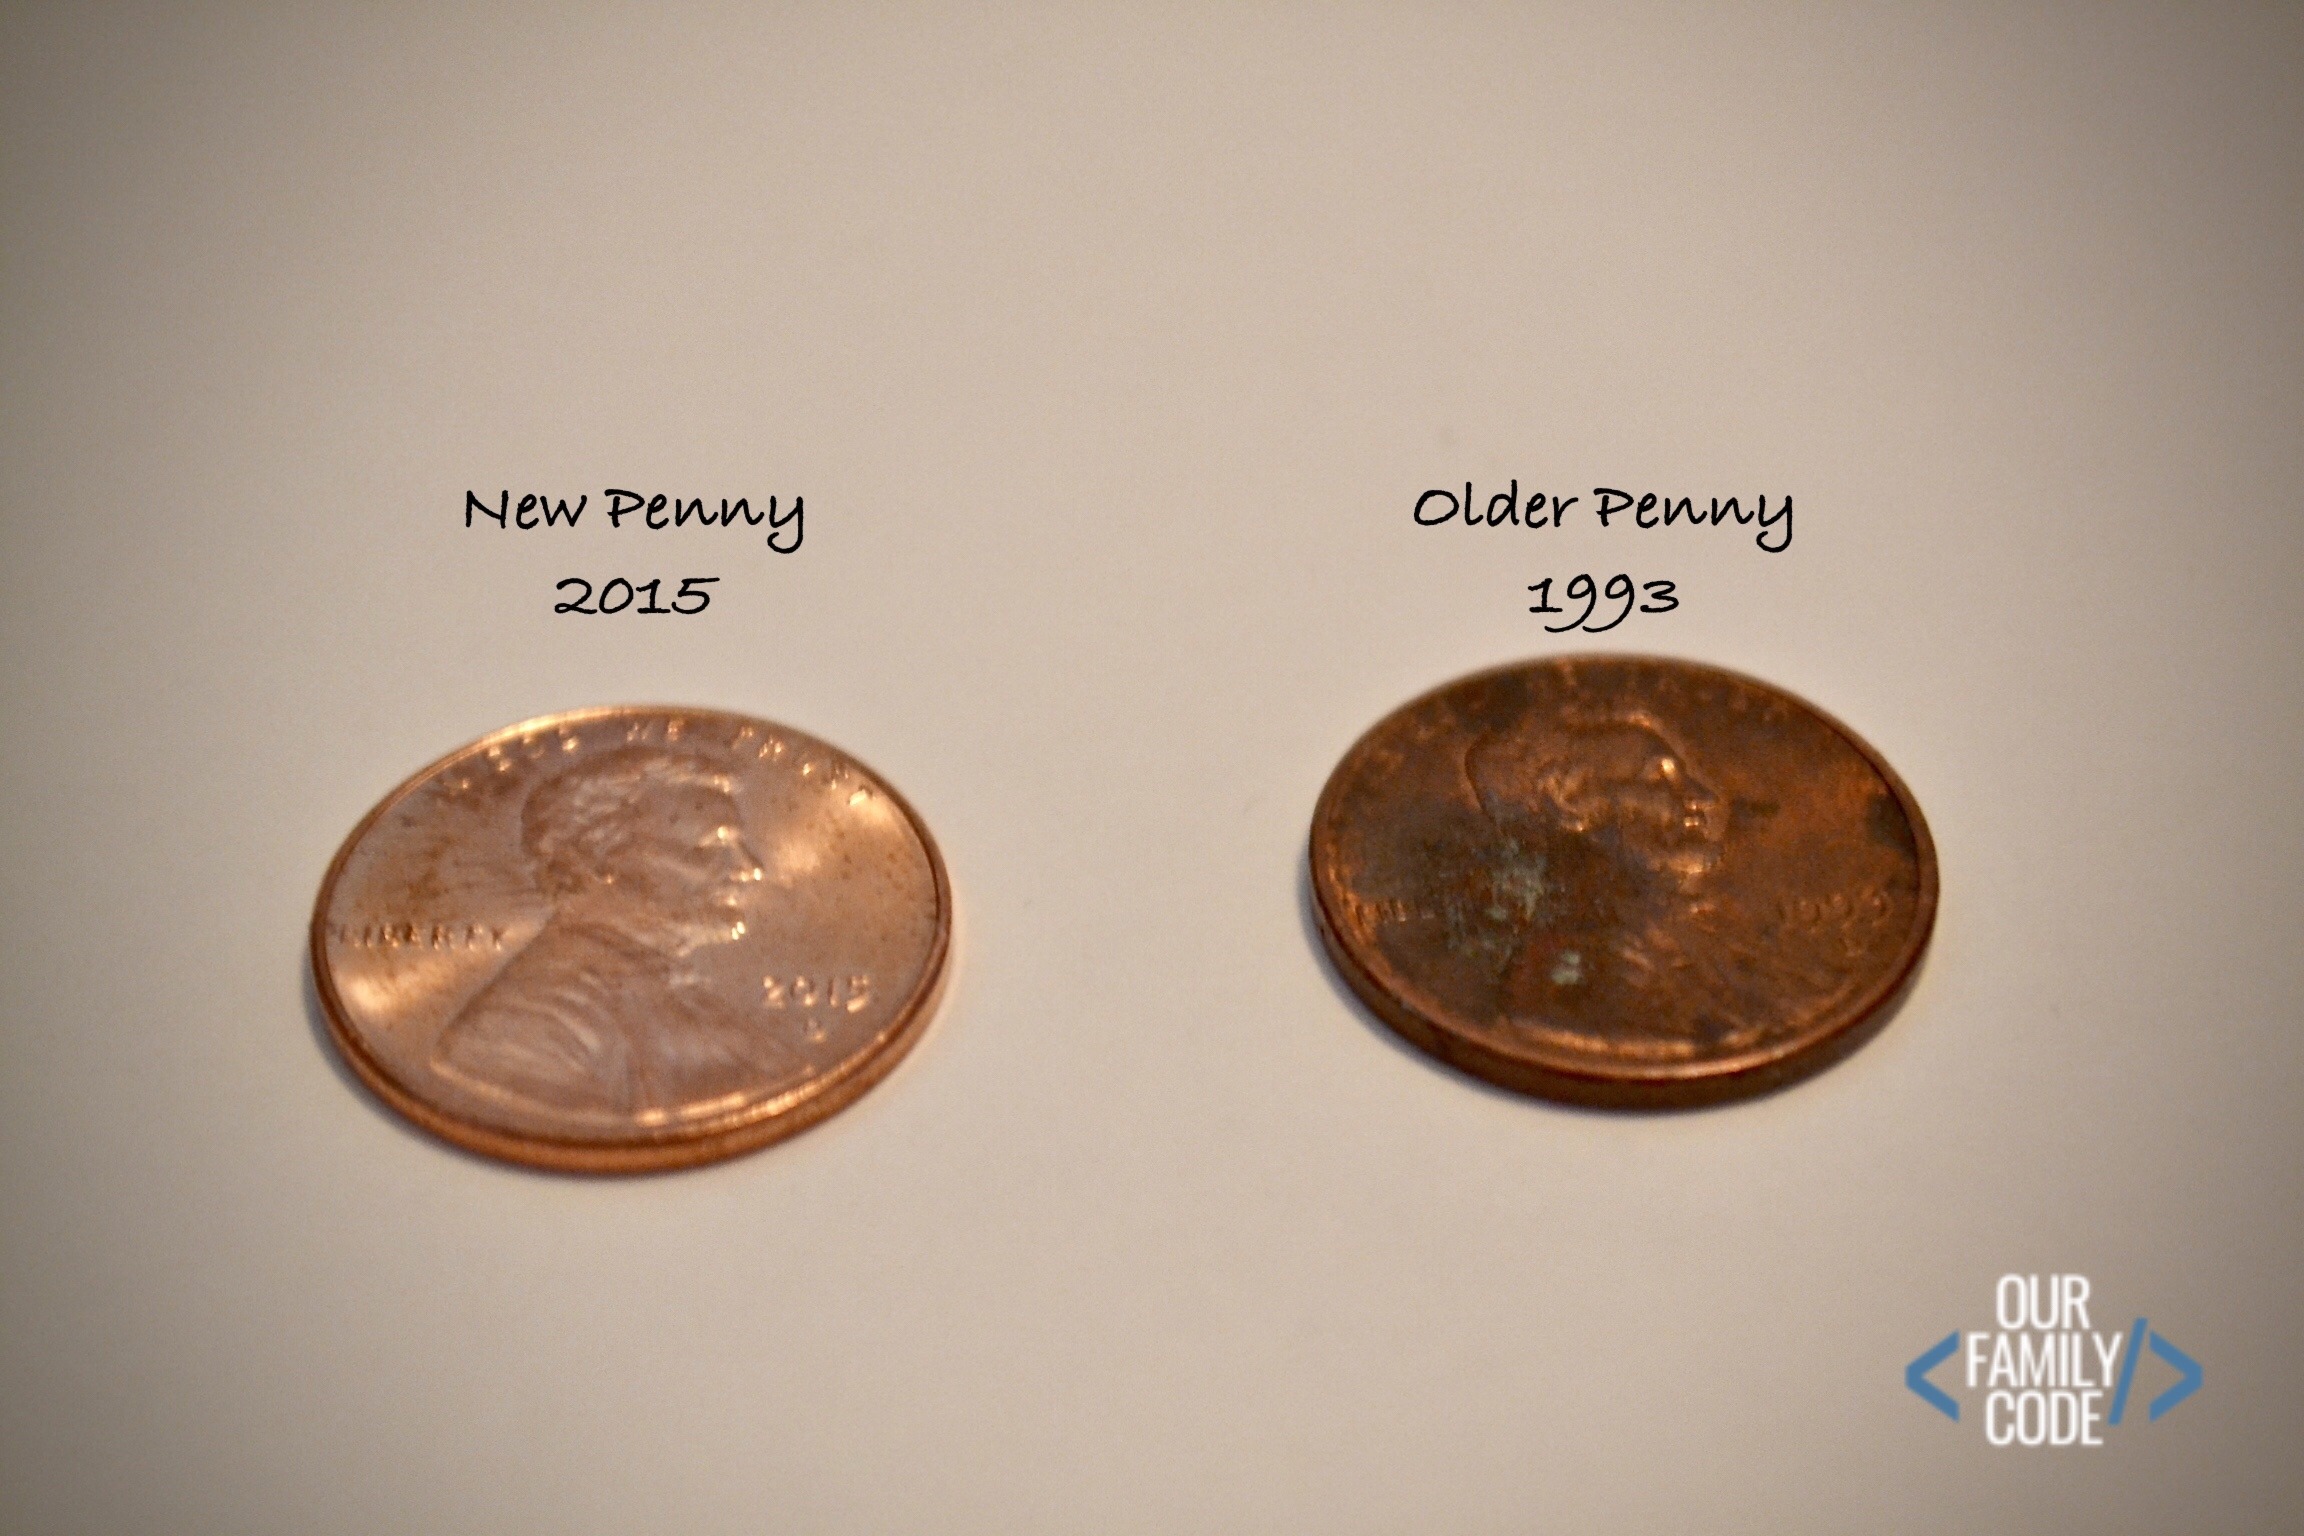 New Penny and Older Penny